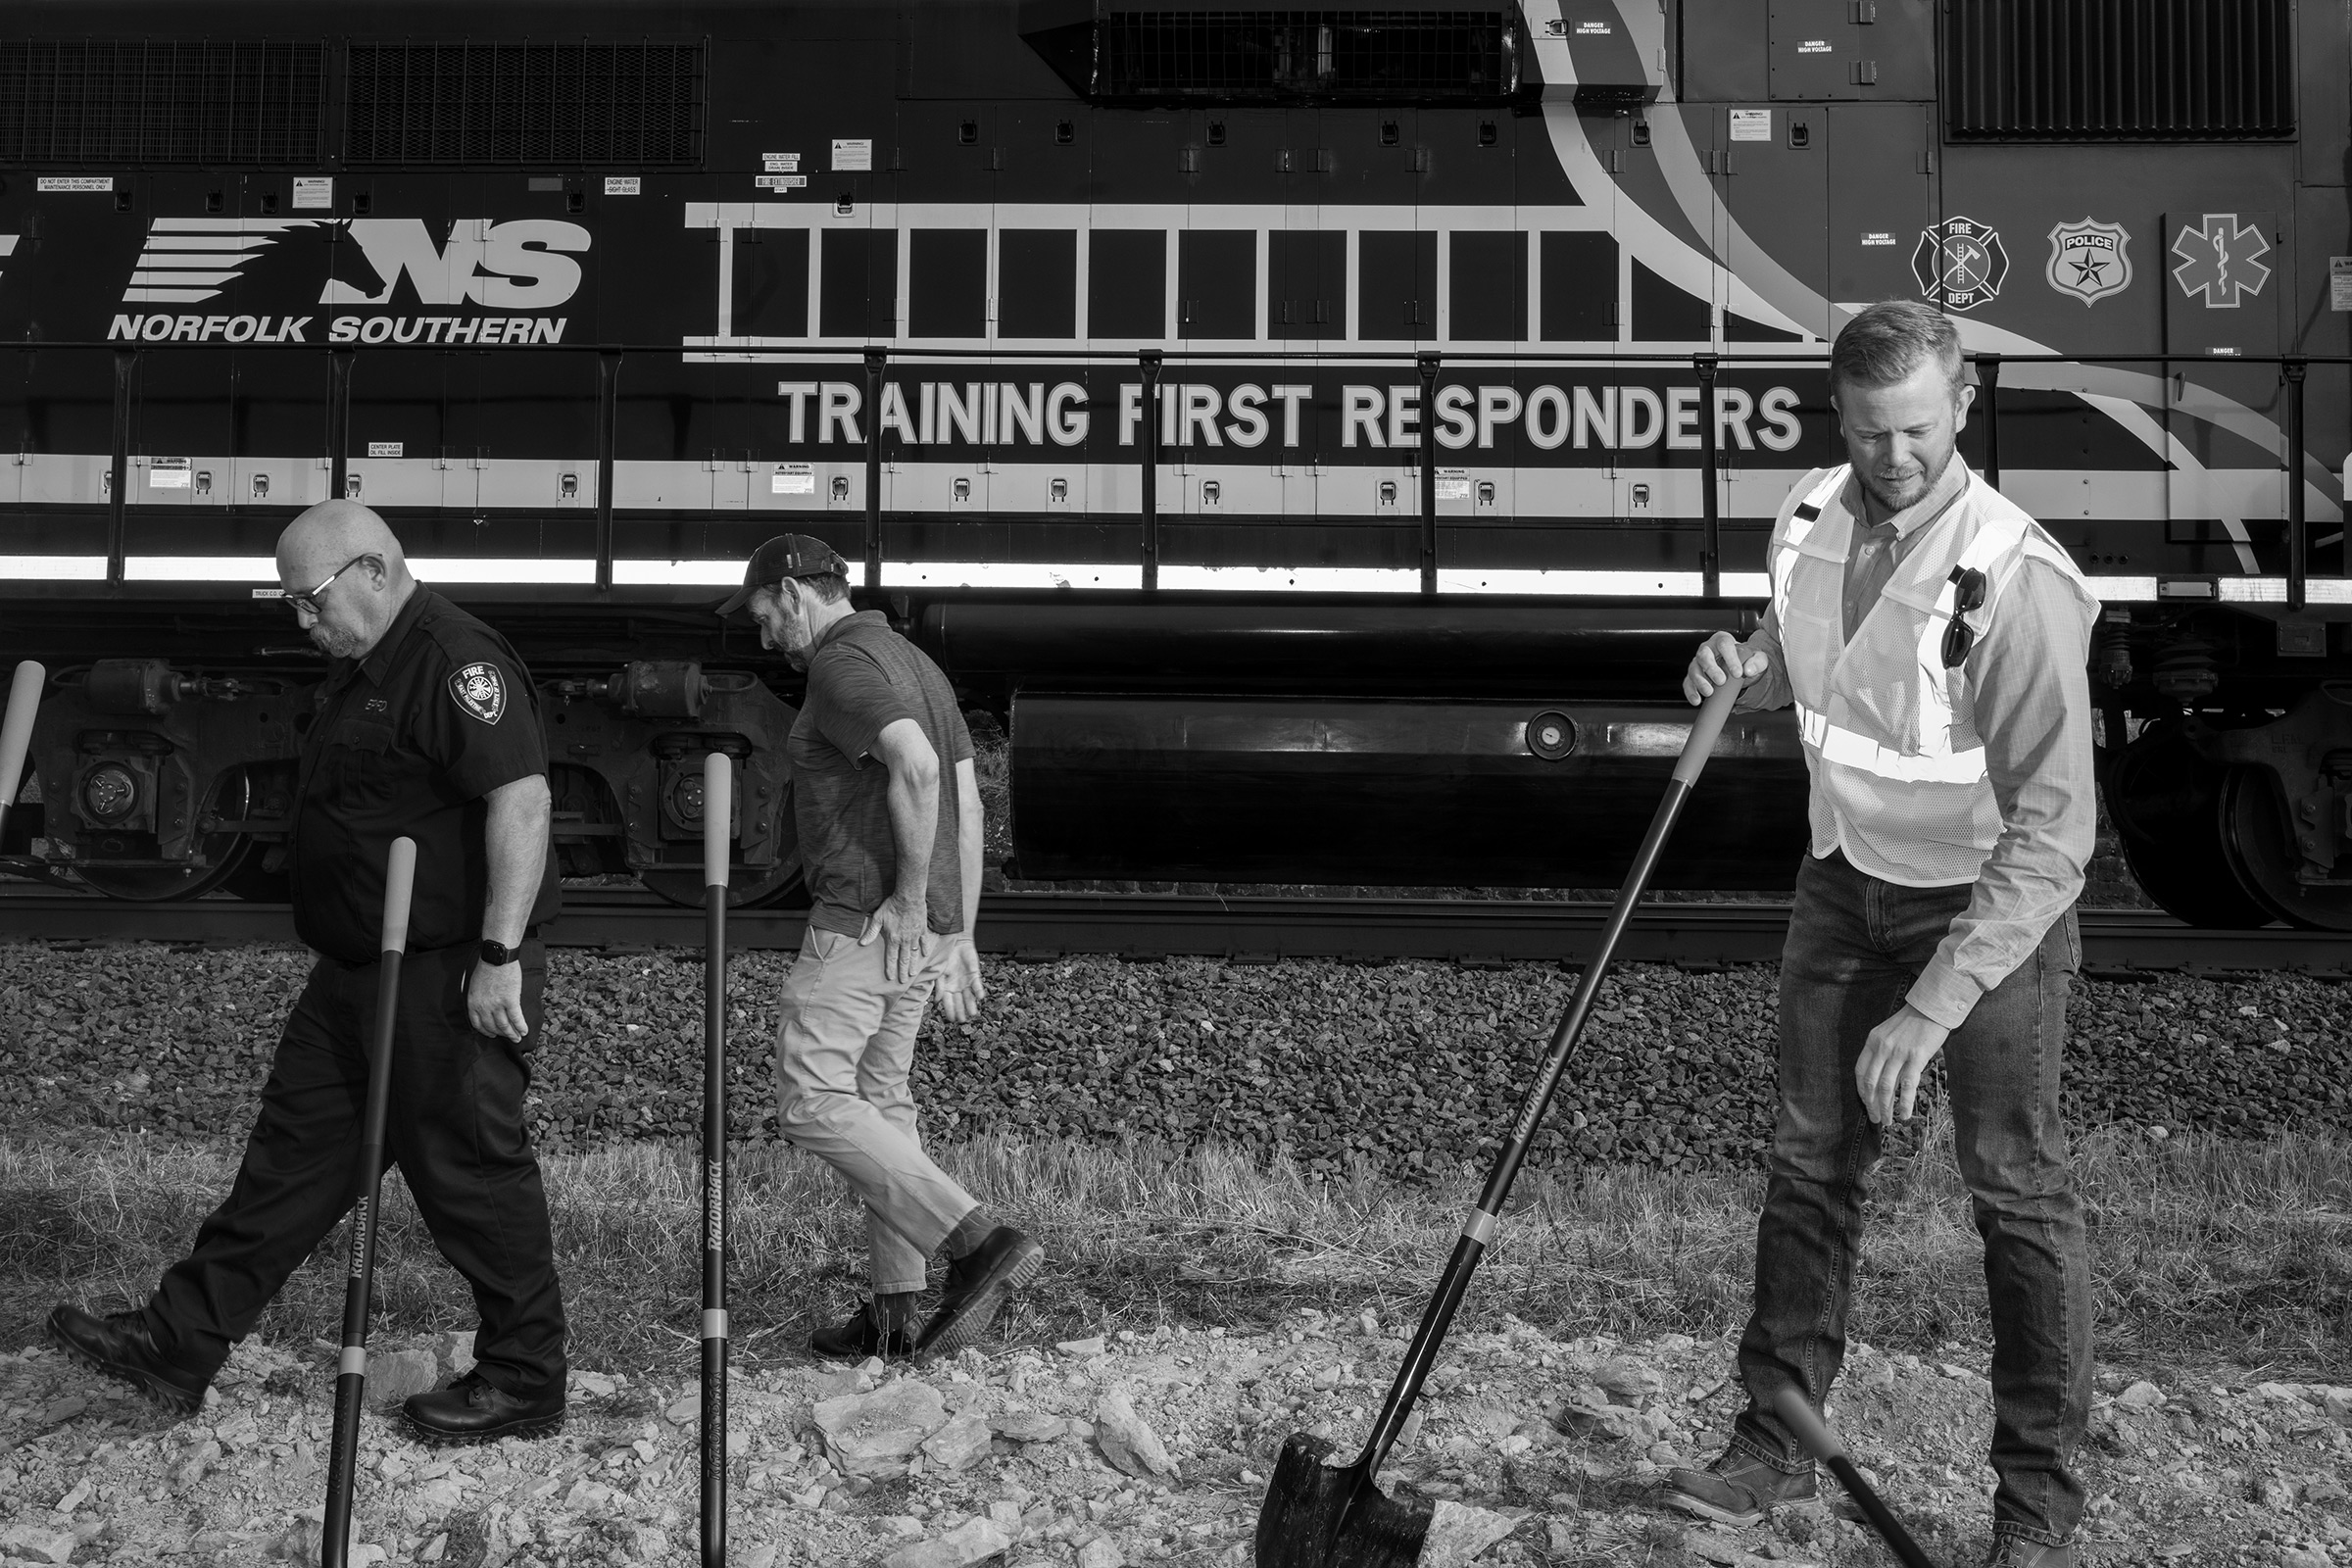 Railroad executives and local leaders break ground for a $25 million regional first responder training center being constructed by Norfolk Southern on Sept. 21.